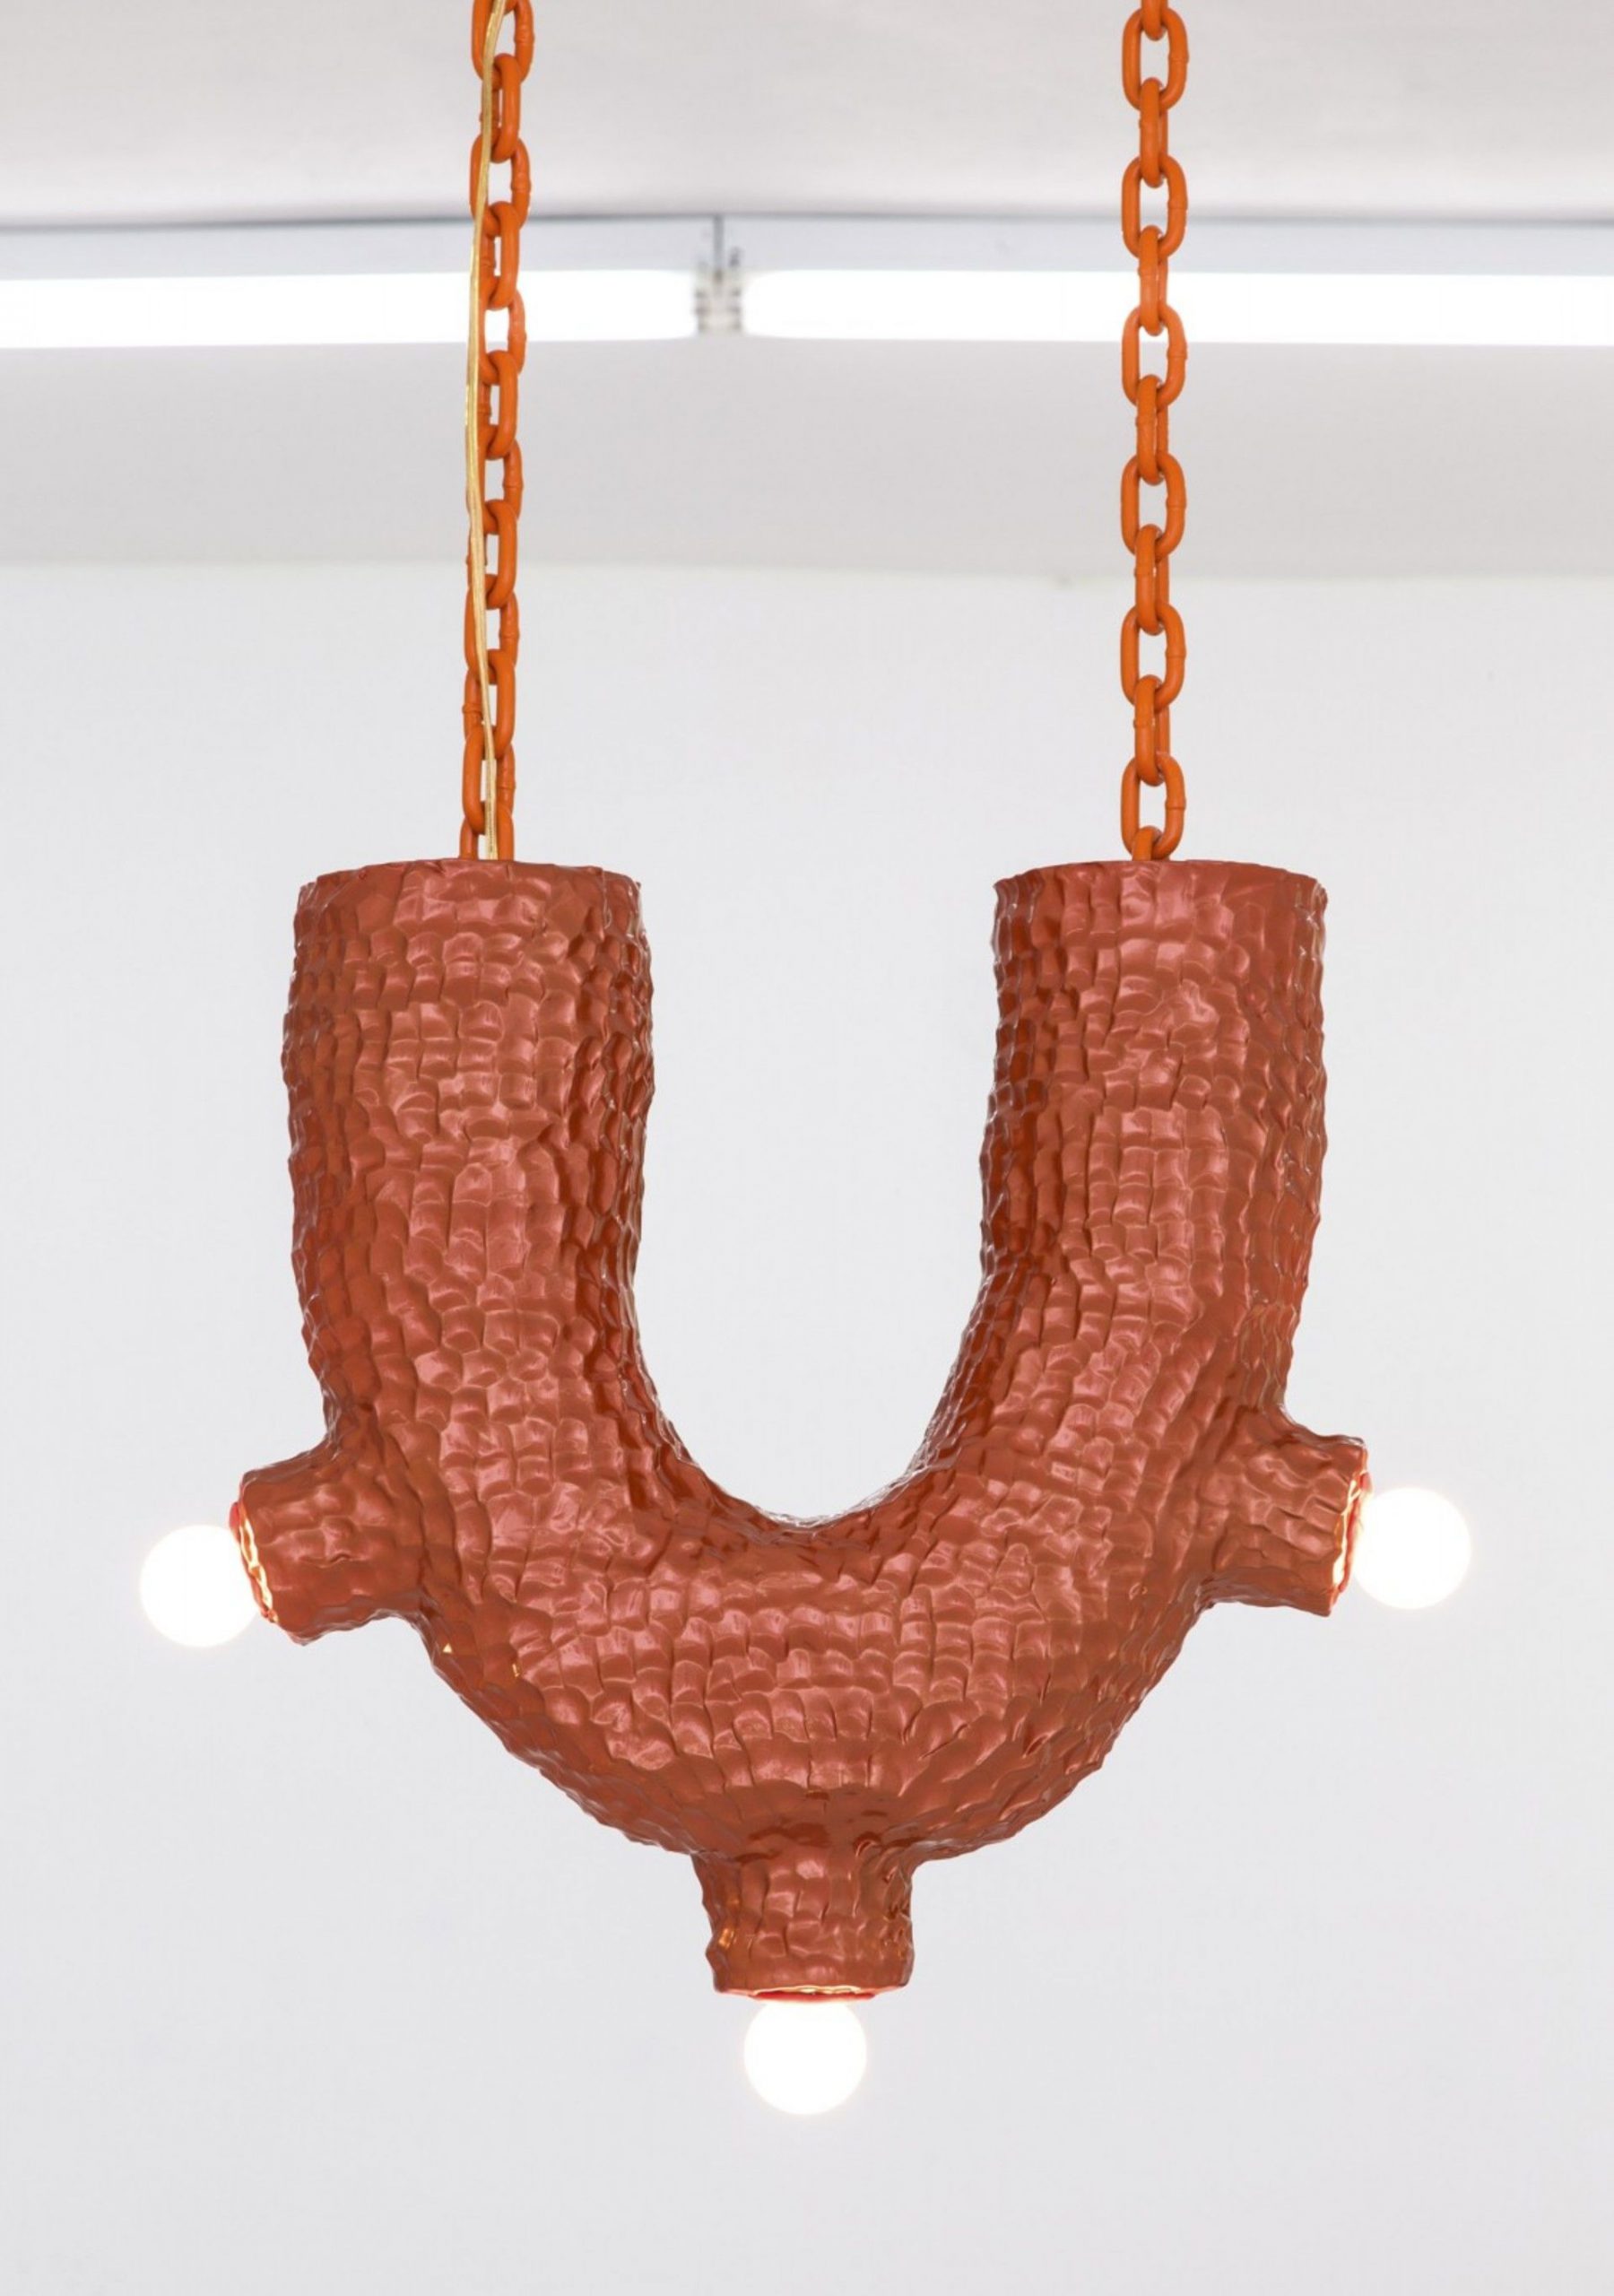 U Lamp by Katie Stout for exhibition Docile/Domicile/Dandy at Gallery Diet, Miami 2015